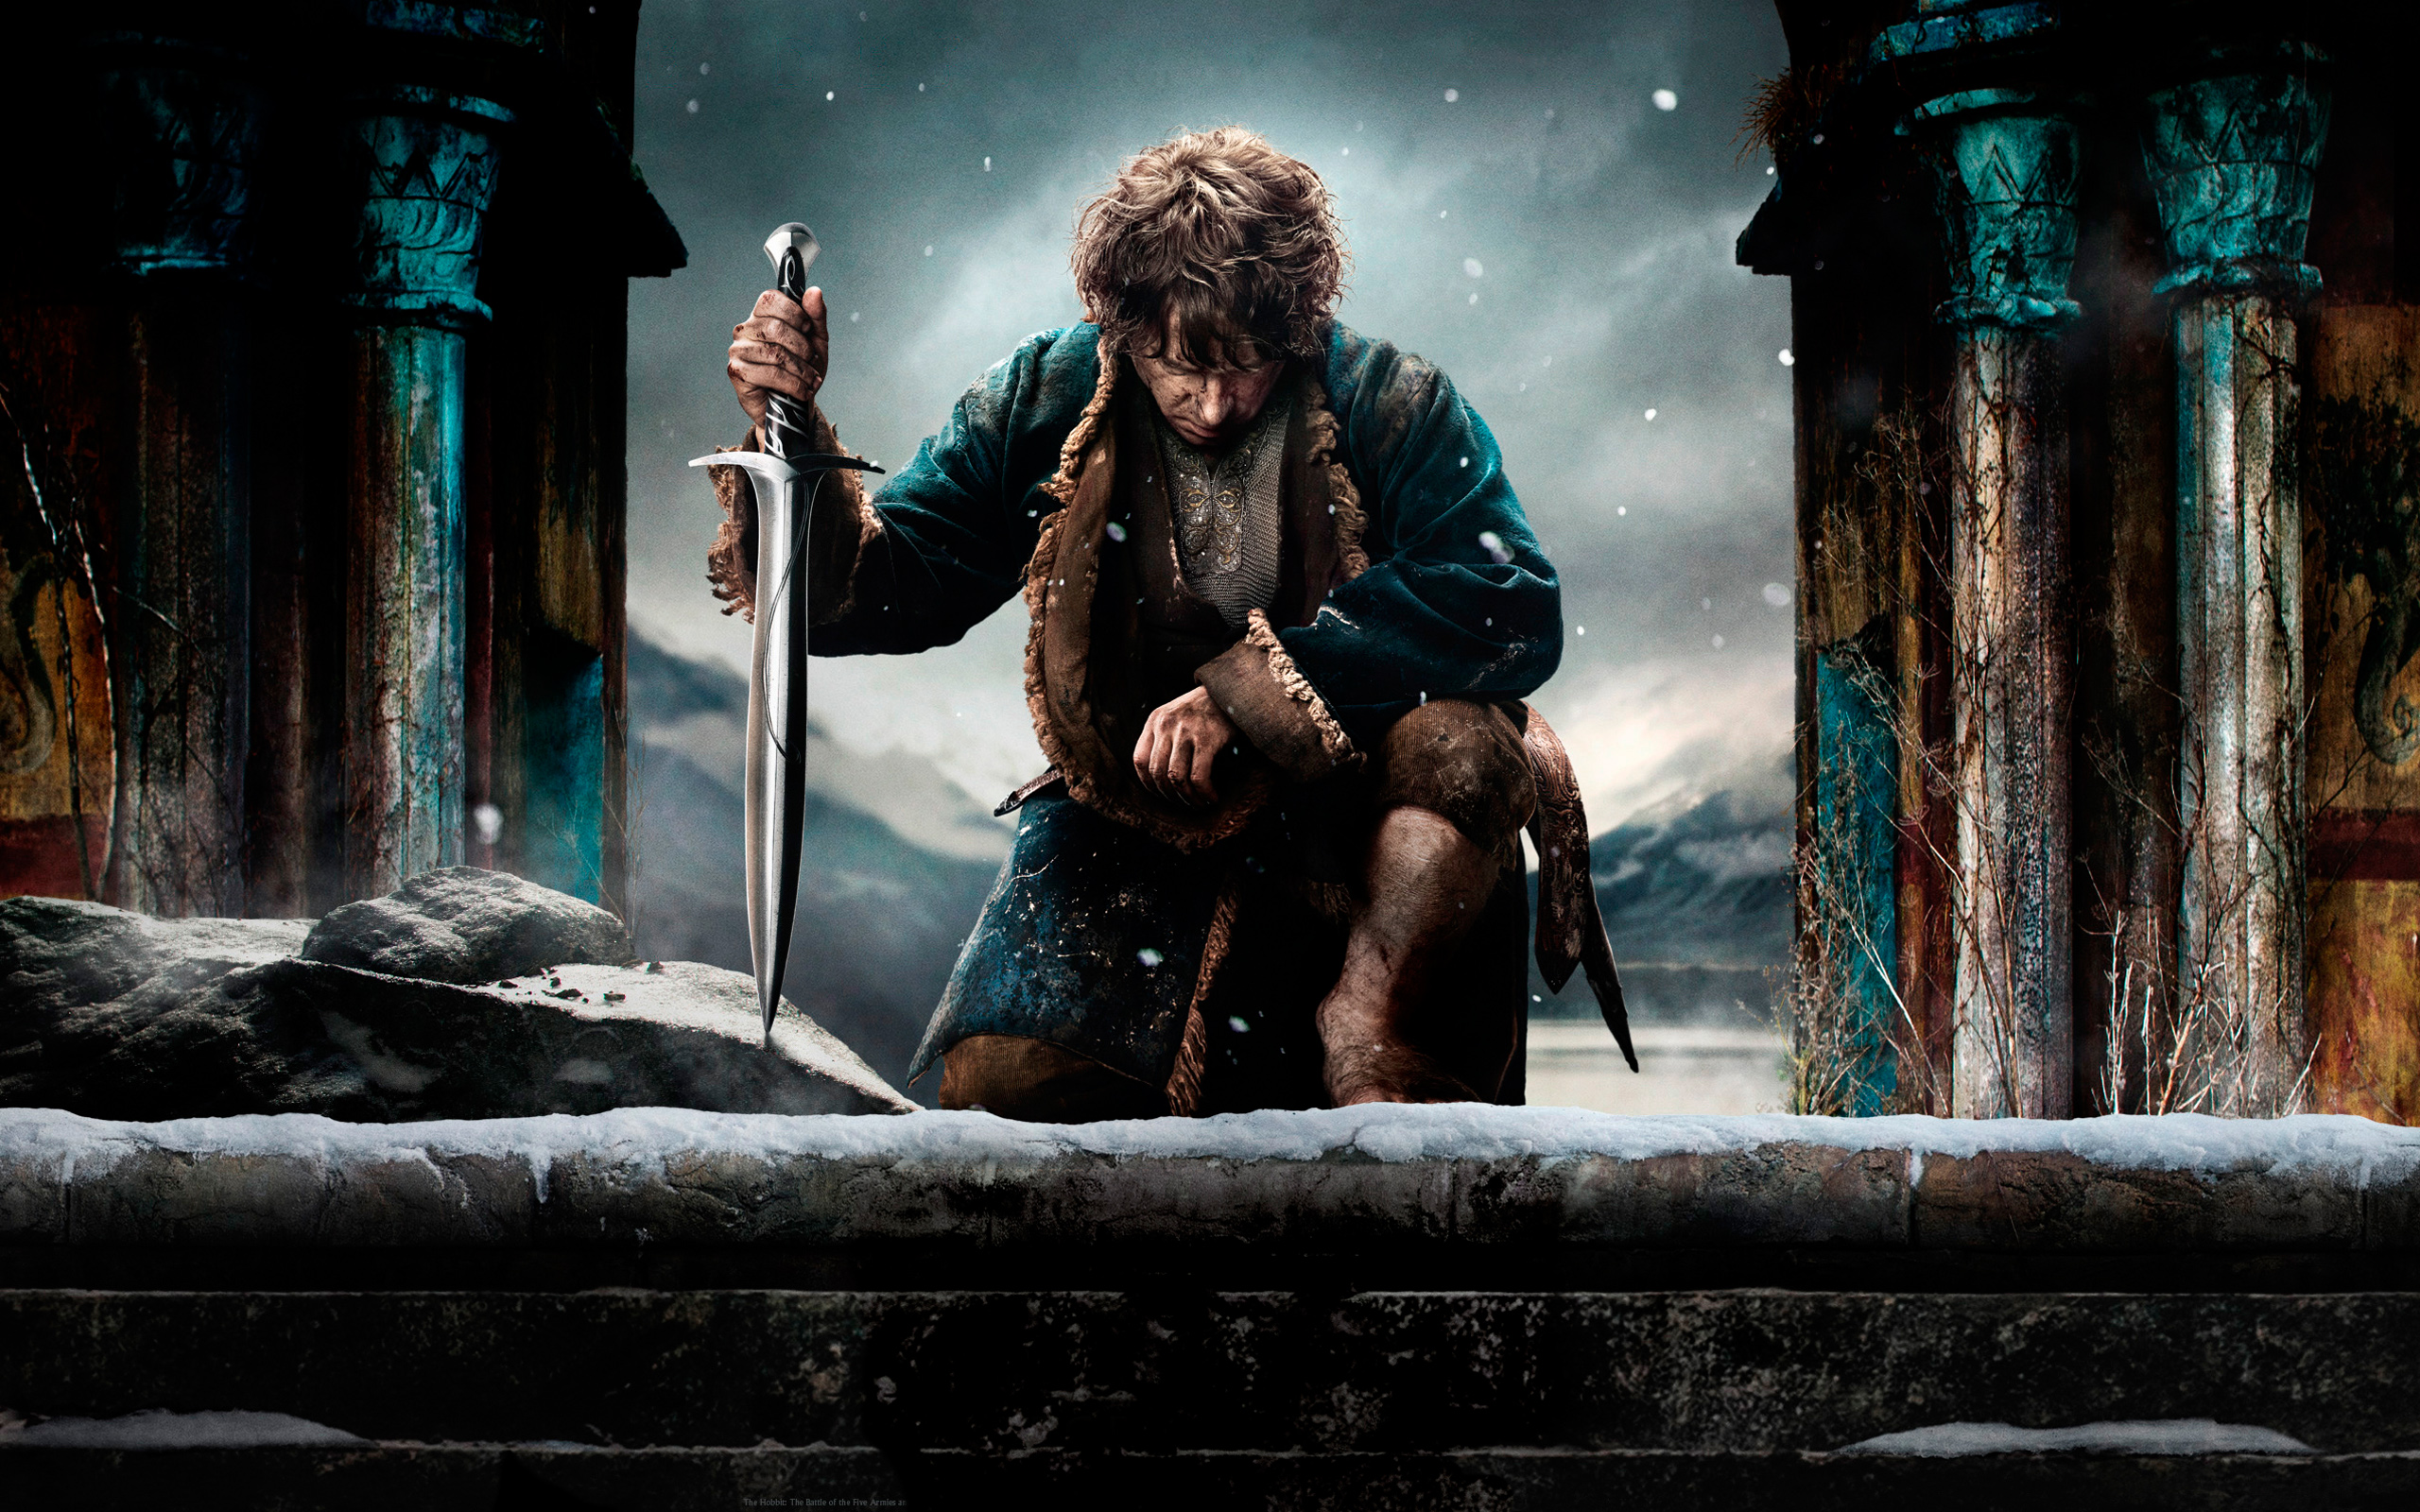 the_hobbit_the_battle_of_the_five_armies_movie-wide1